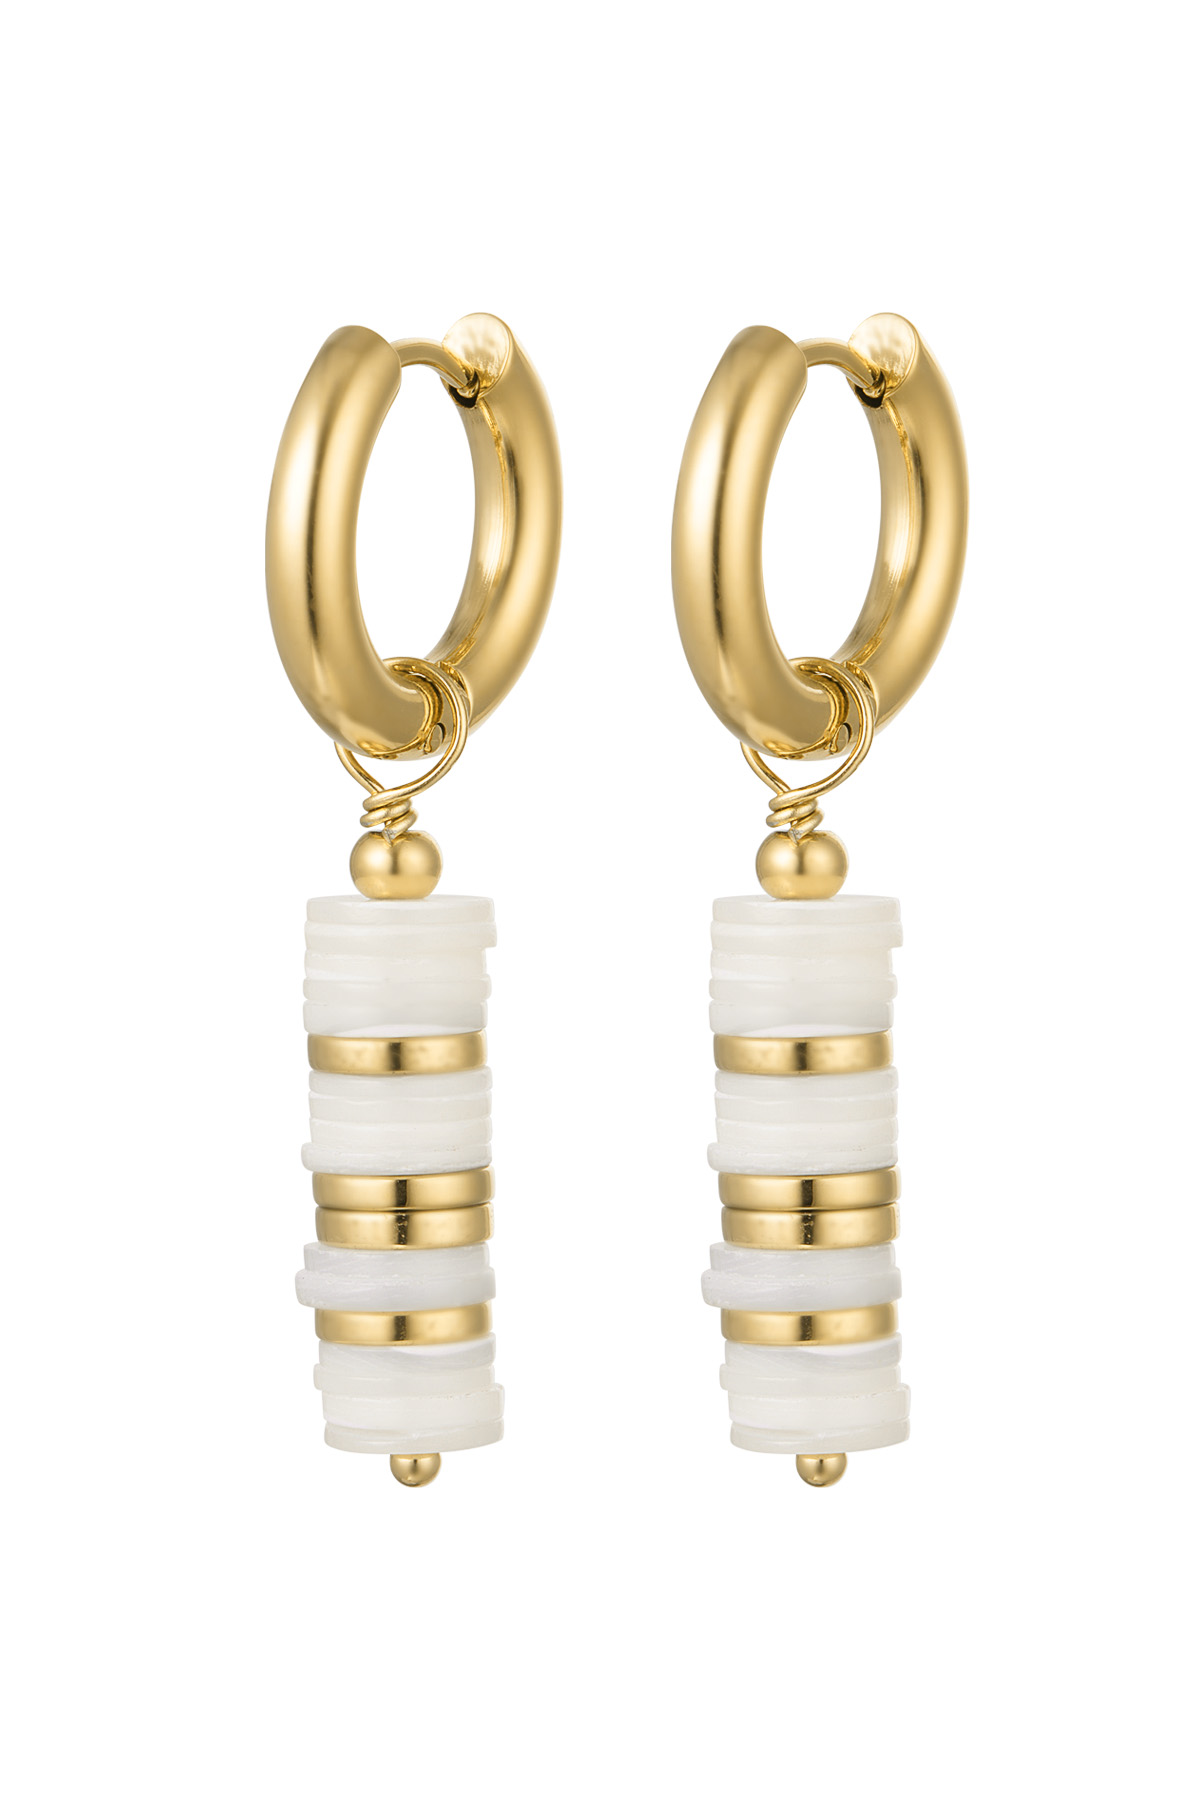 Earrings flat beads - gold Stainless Steel h5 